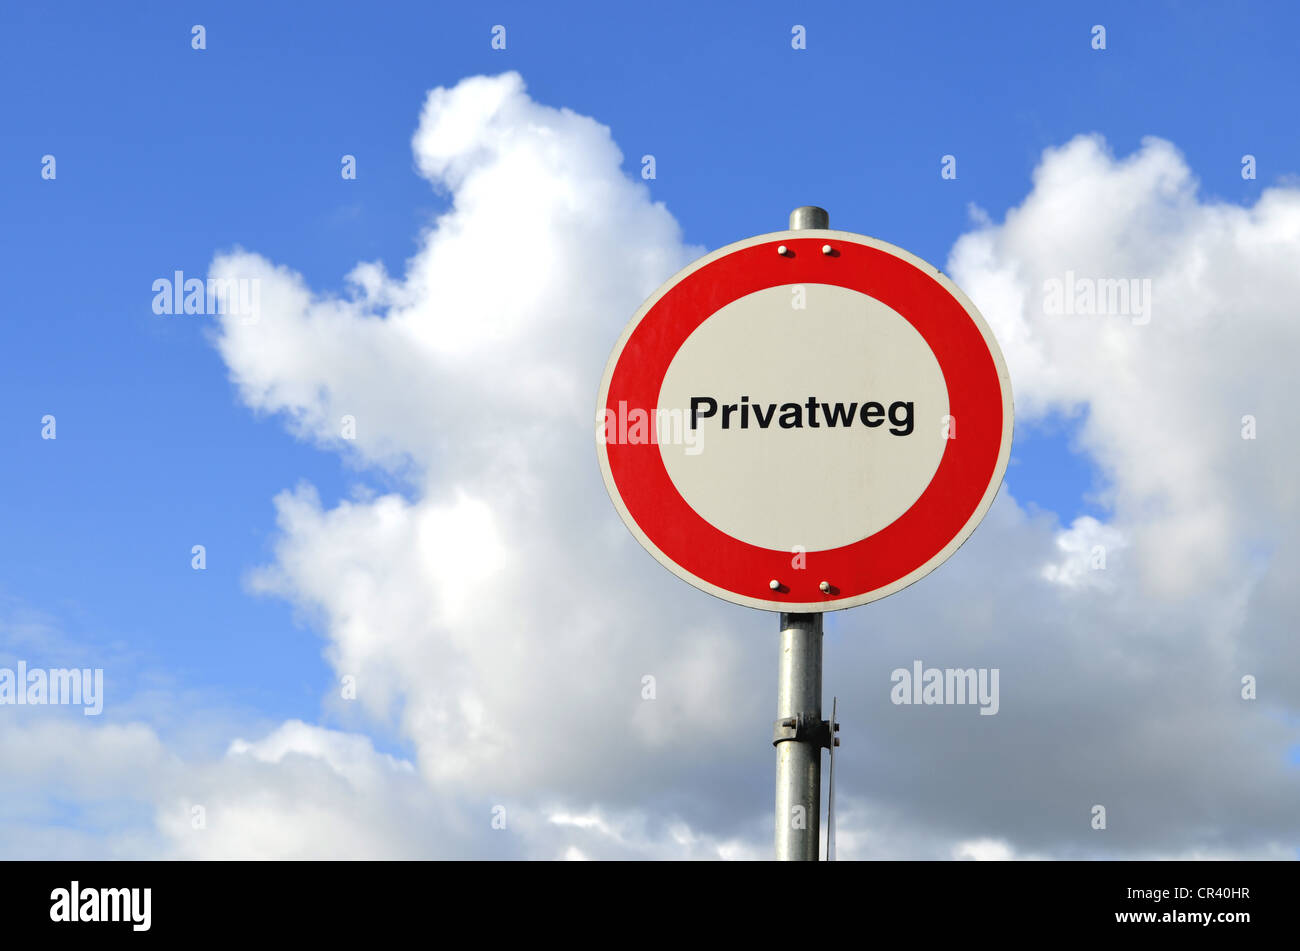 'Privatweg', German for 'private road', road sign against clouds, Germany, Europe Stock Photo